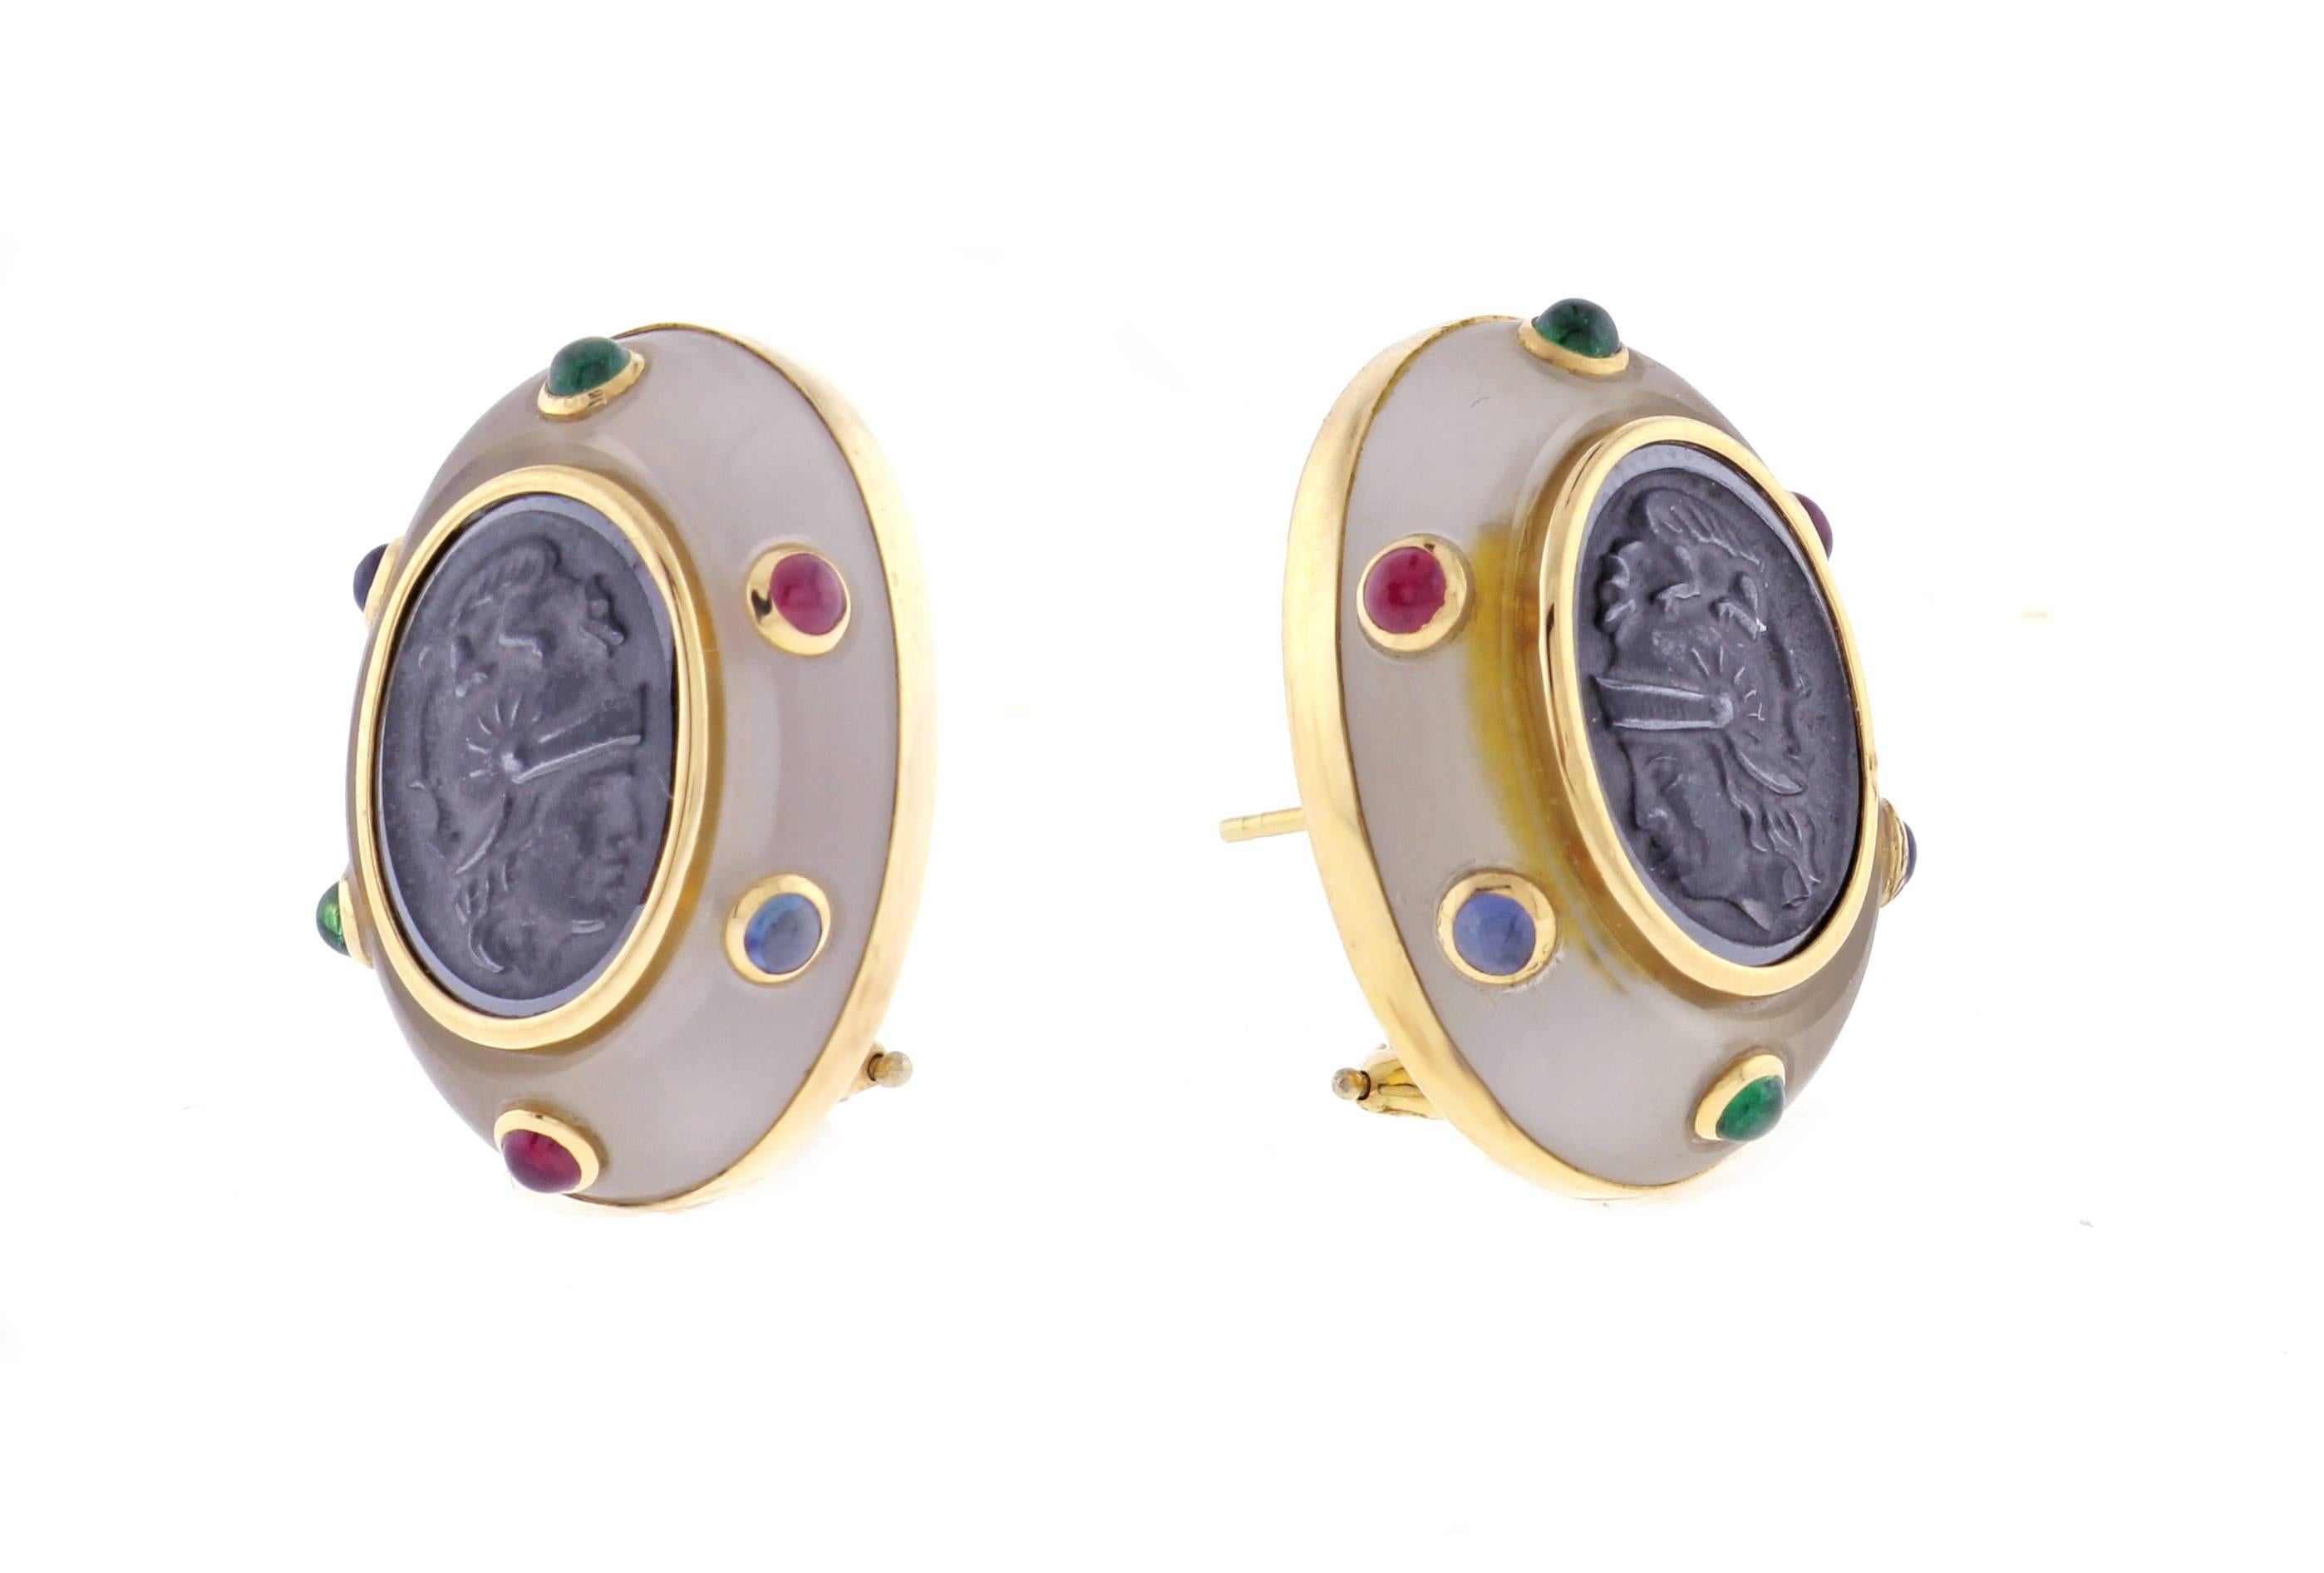 Creating original jewels with unusual combinations of precious and exotic materials has been the hallmark of Trianon for over 30 years. Oval hematite intaglios are framed by frosted crystal quarts embedded with cabochon emeralds rubies and